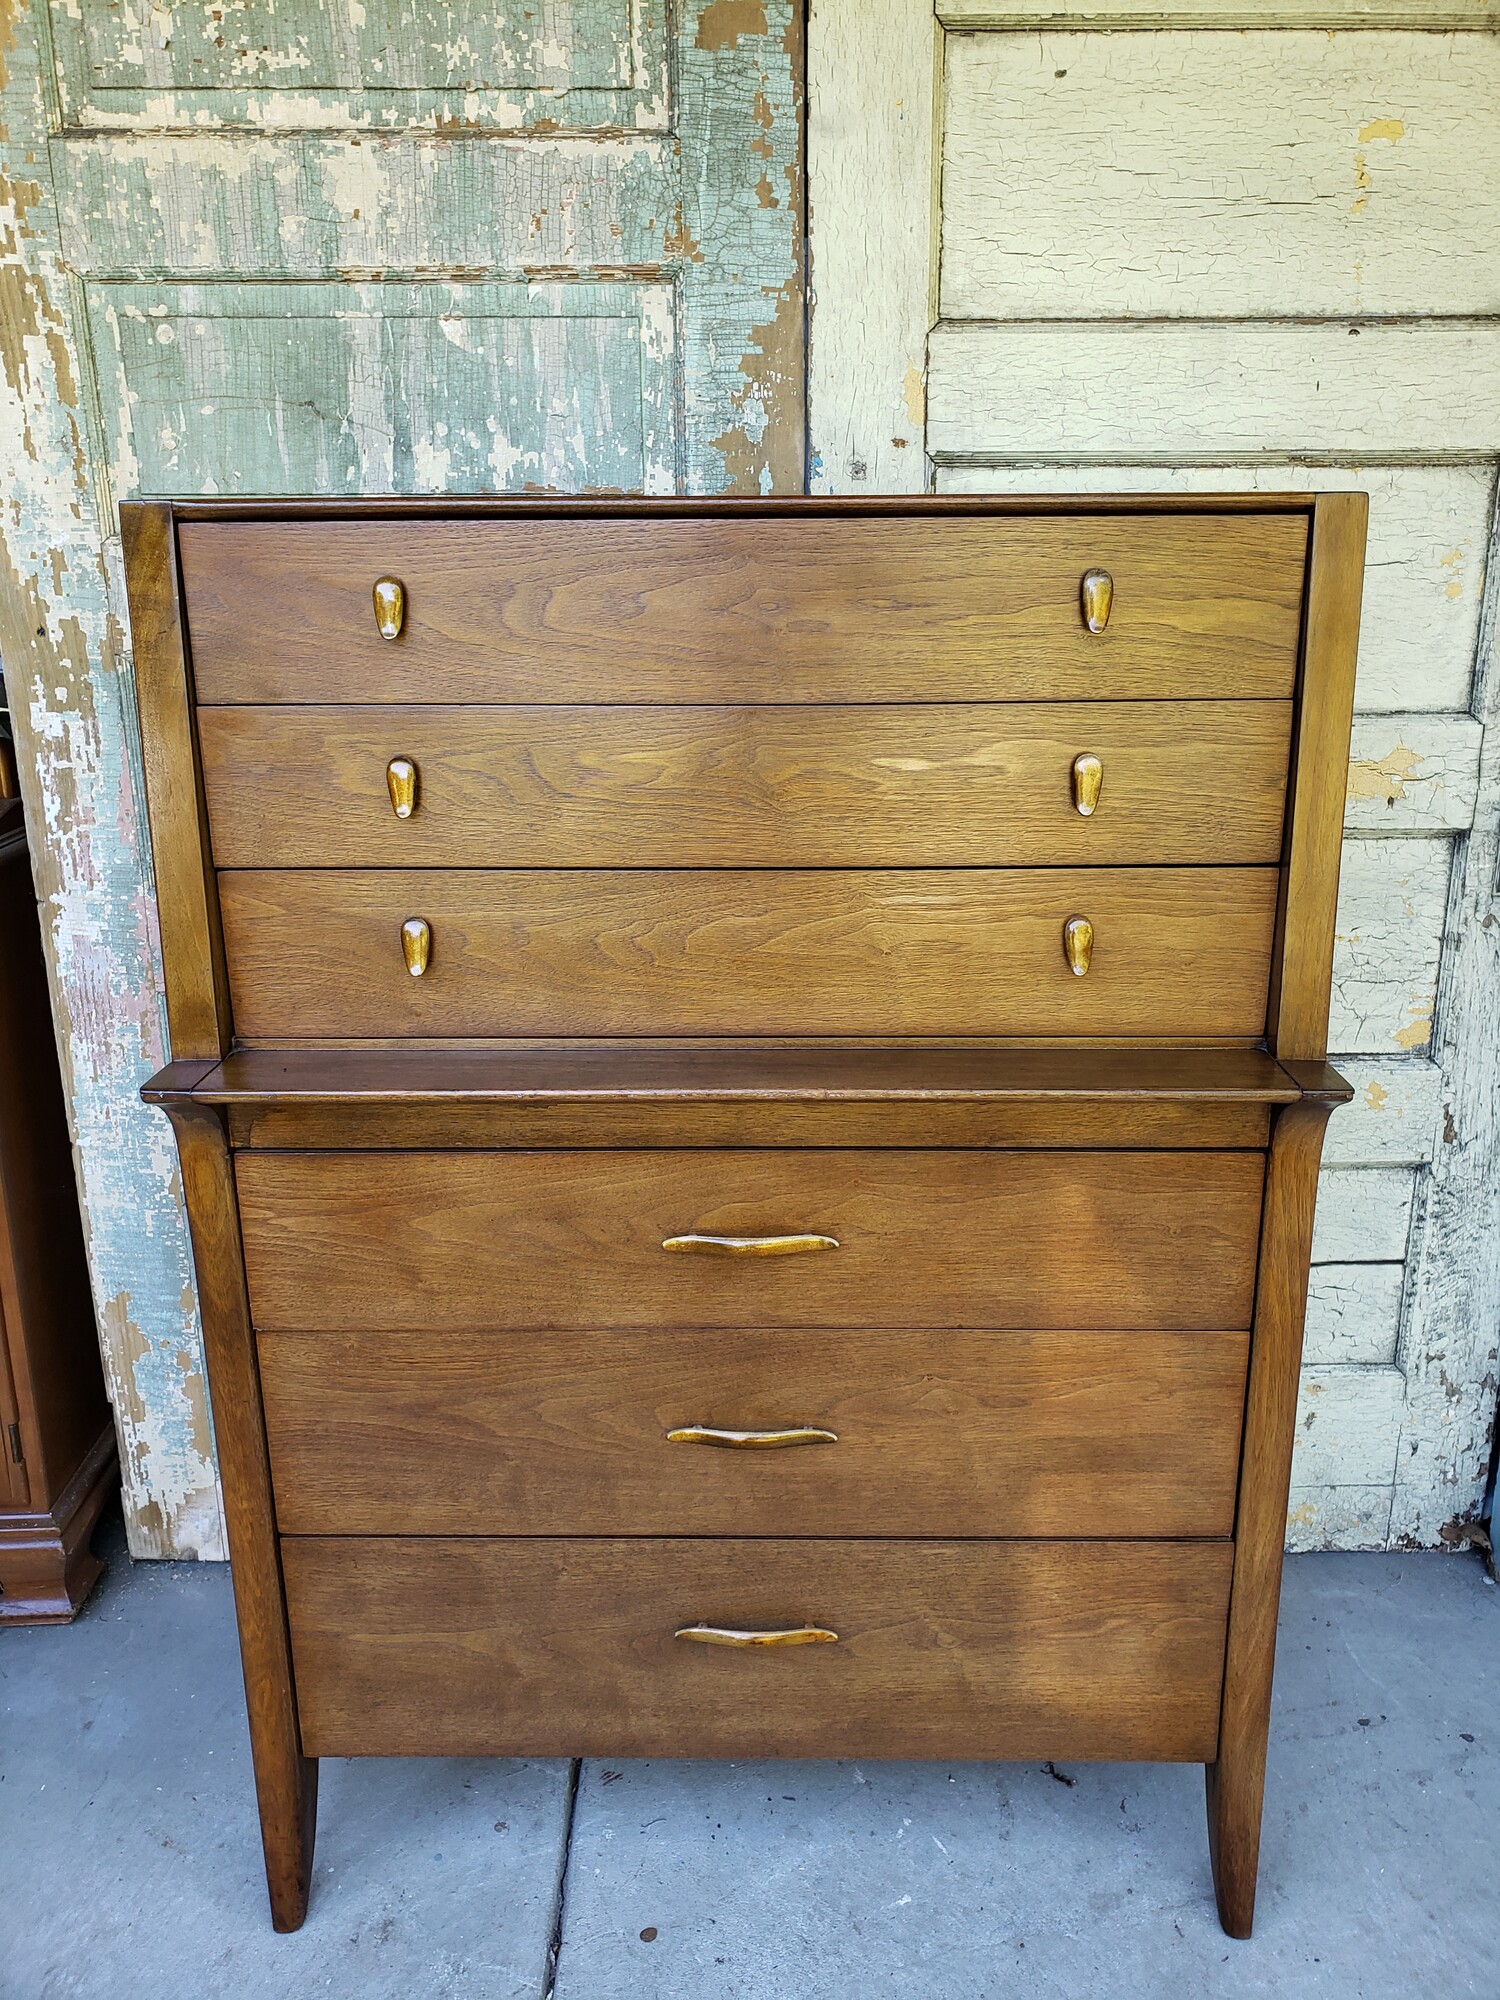 Vintage MCM Dresser by Drexel. Very nice condition. Size: 48x34x21